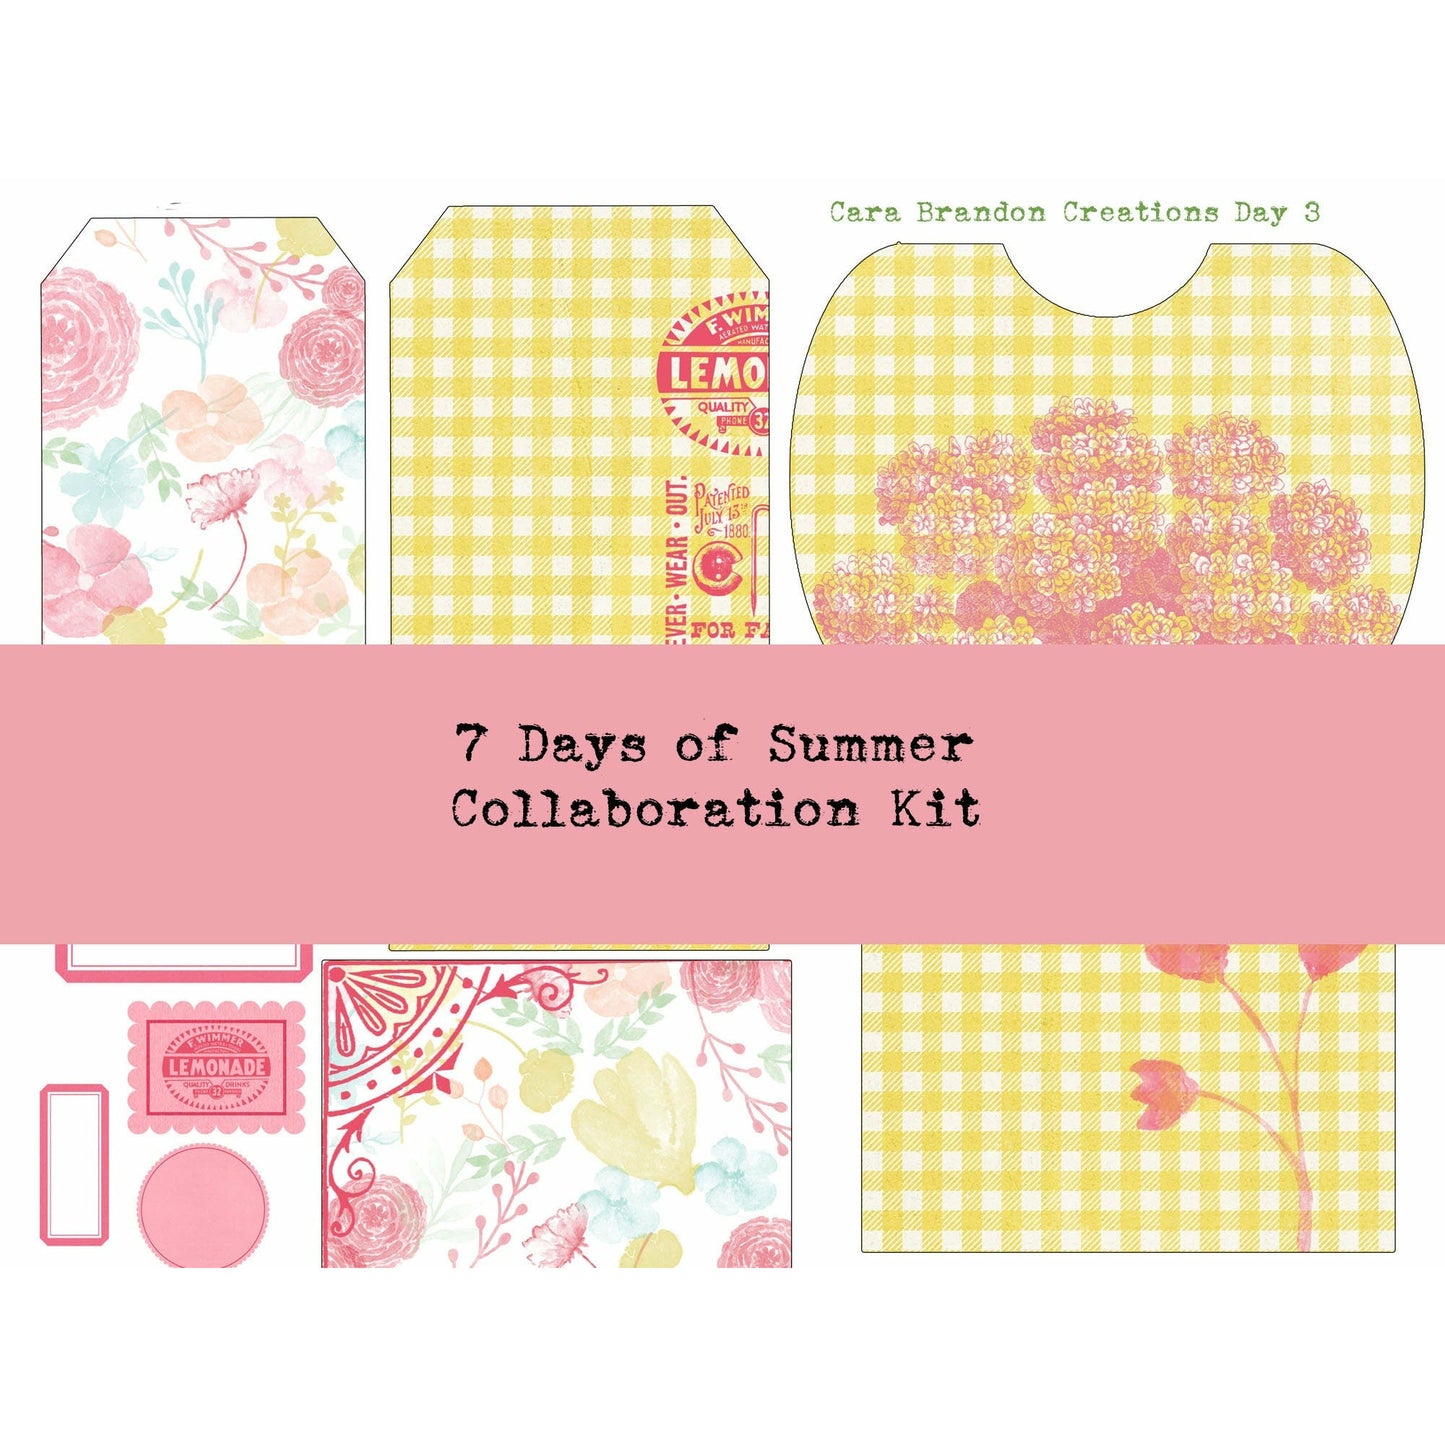 7 Days of Summer Collaboration Kit with DearJulieJulie